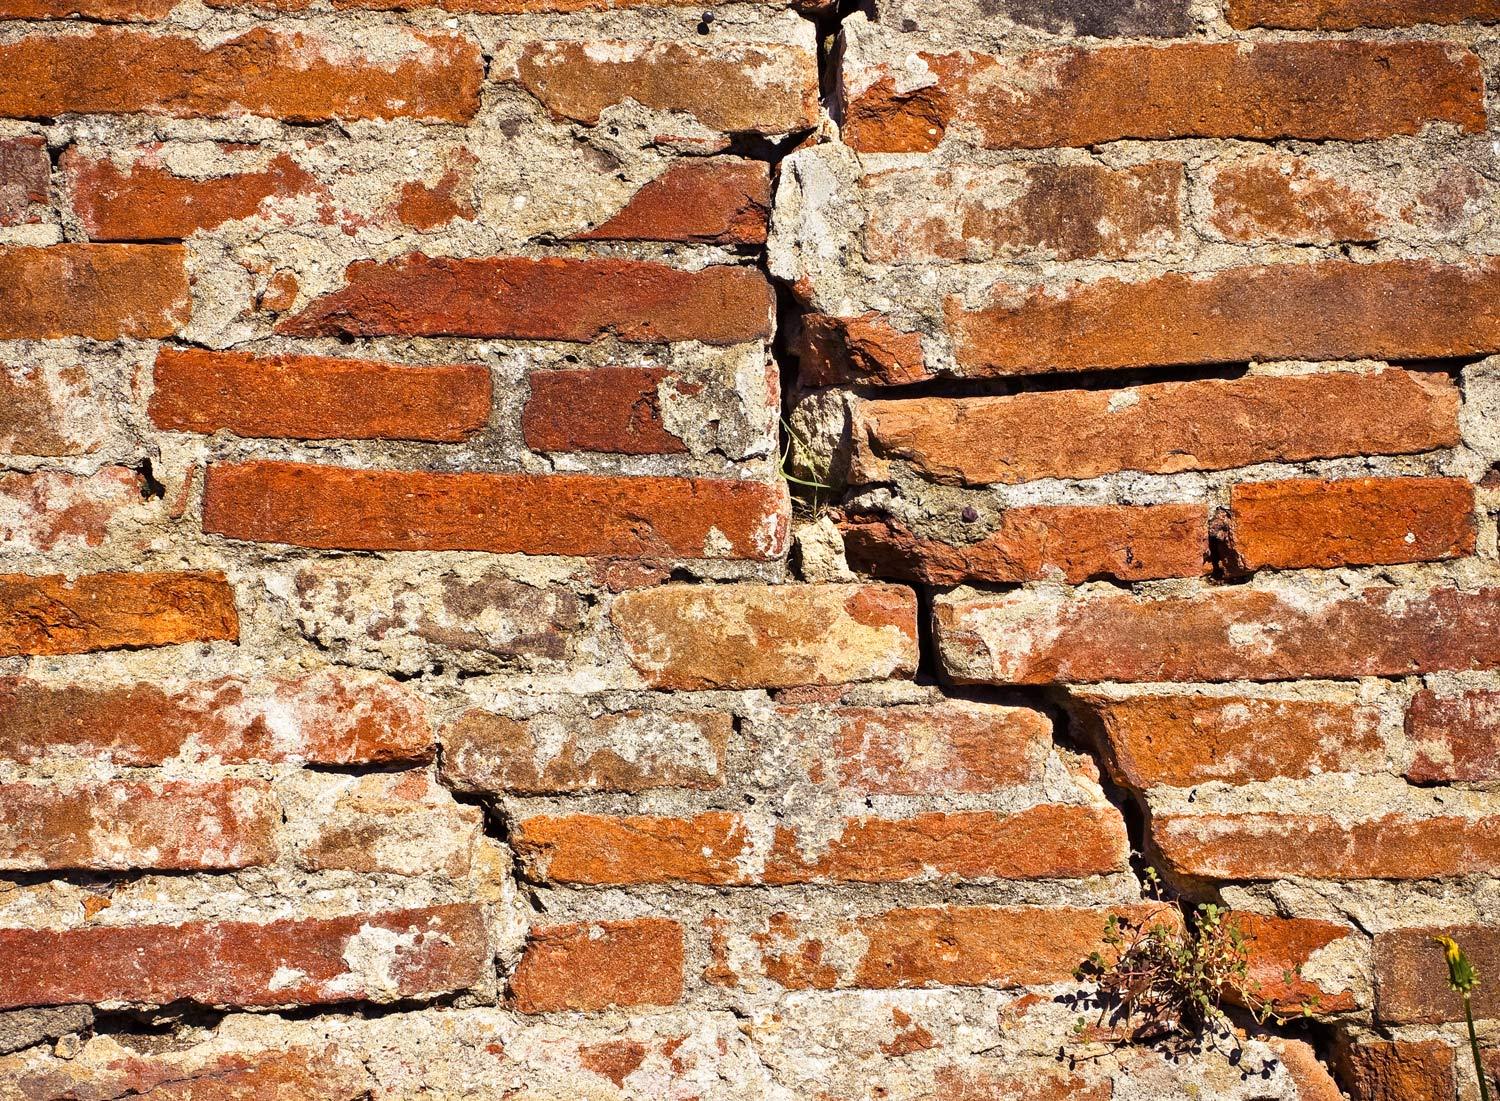 What is Subsidence and what to do about it?